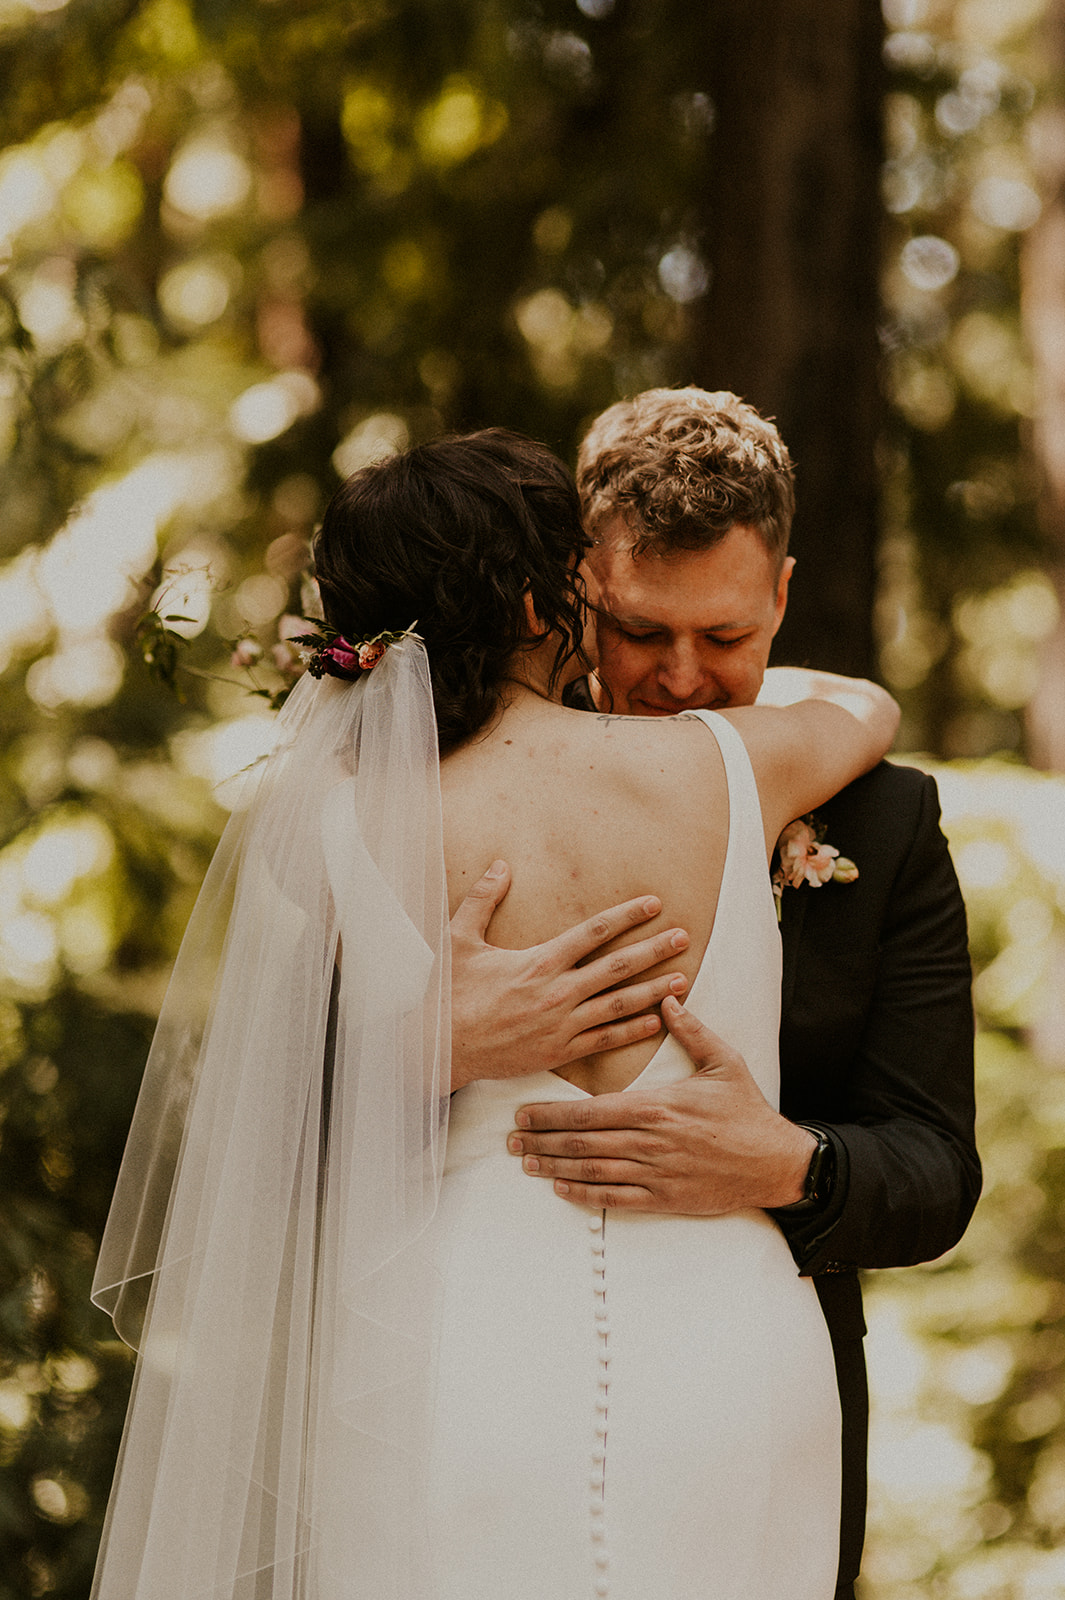 Emotional Moment between bride and groom as they share their first look in the Redwoods of California in Big Sur